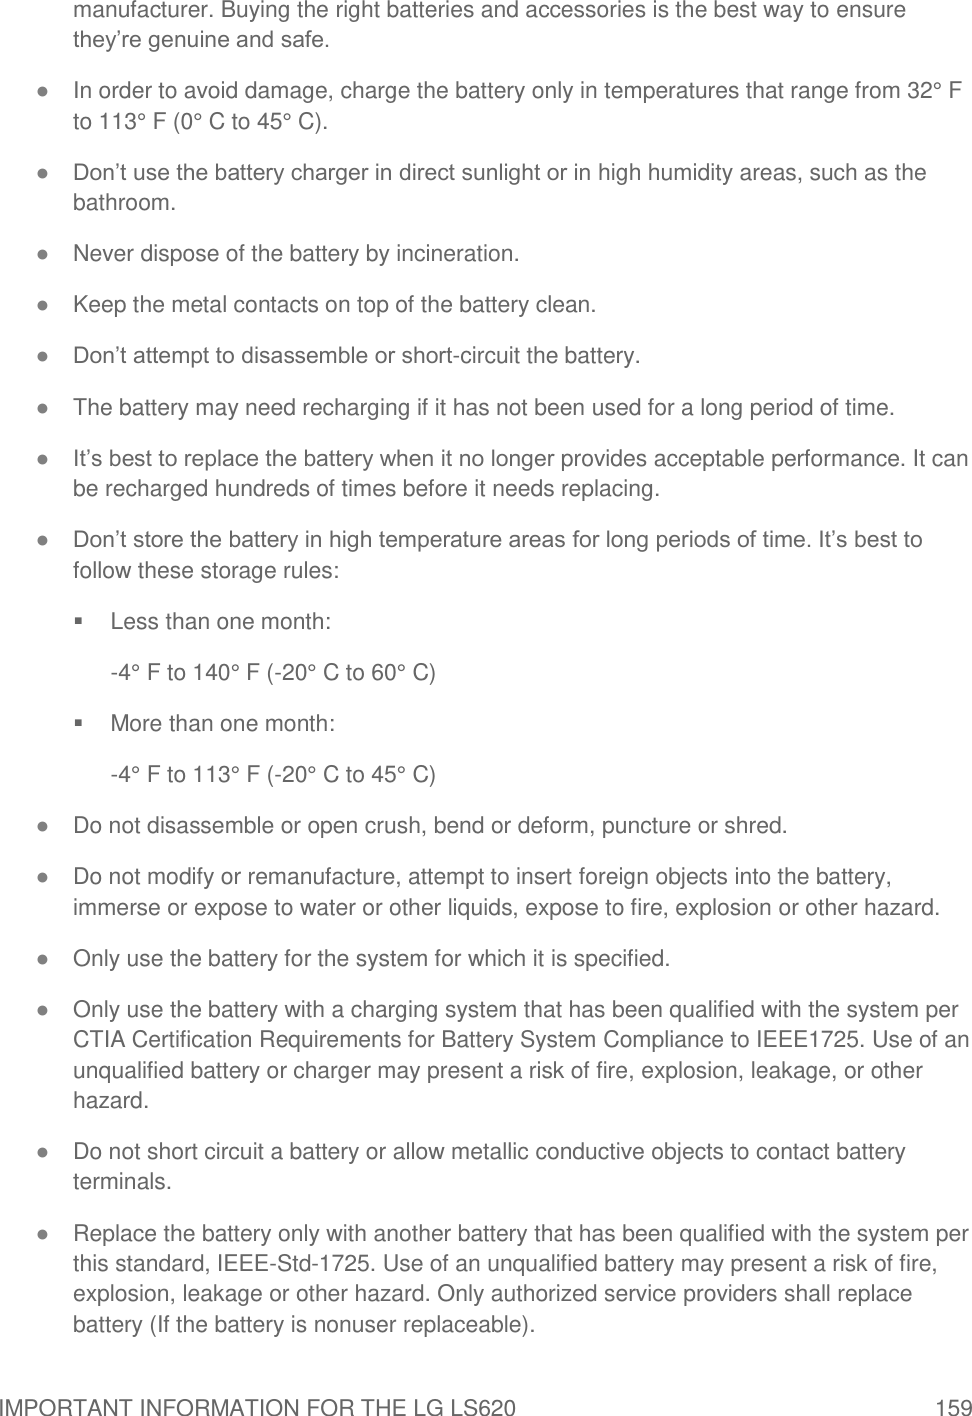 IMPORTANT INFORMATION FOR THE LG LS620  159 manufacturer. Buying the right batteries and accessories is the best way to ensure they‘re genuine and safe. ● In order to avoid damage, charge the battery only in temperatures that range from 32° F to 113° F (0° C to 45° C). ● Don‘t use the battery charger in direct sunlight or in high humidity areas, such as the bathroom. ● Never dispose of the battery by incineration.  ● Keep the metal contacts on top of the battery clean. ● Don‘t attempt to disassemble or short-circuit the battery. ● The battery may need recharging if it has not been used for a long period of time. ● It‘s best to replace the battery when it no longer provides acceptable performance. It can be recharged hundreds of times before it needs replacing. ● Don‘t store the battery in high temperature areas for long periods of time. It‘s best to follow these storage rules:   Less than one month: -4° F to 140° F (-20° C to 60° C)   More than one month: -4° F to 113° F (-20° C to 45° C) ● Do not disassemble or open crush, bend or deform, puncture or shred. ● Do not modify or remanufacture, attempt to insert foreign objects into the battery, immerse or expose to water or other liquids, expose to fire, explosion or other hazard. ● Only use the battery for the system for which it is specified. ● Only use the battery with a charging system that has been qualified with the system per CTIA Certification Requirements for Battery System Compliance to IEEE1725. Use of an unqualified battery or charger may present a risk of fire, explosion, leakage, or other hazard. ● Do not short circuit a battery or allow metallic conductive objects to contact battery terminals. ● Replace the battery only with another battery that has been qualified with the system per this standard, IEEE-Std-1725. Use of an unqualified battery may present a risk of fire, explosion, leakage or other hazard. Only authorized service providers shall replace battery (If the battery is nonuser replaceable). 